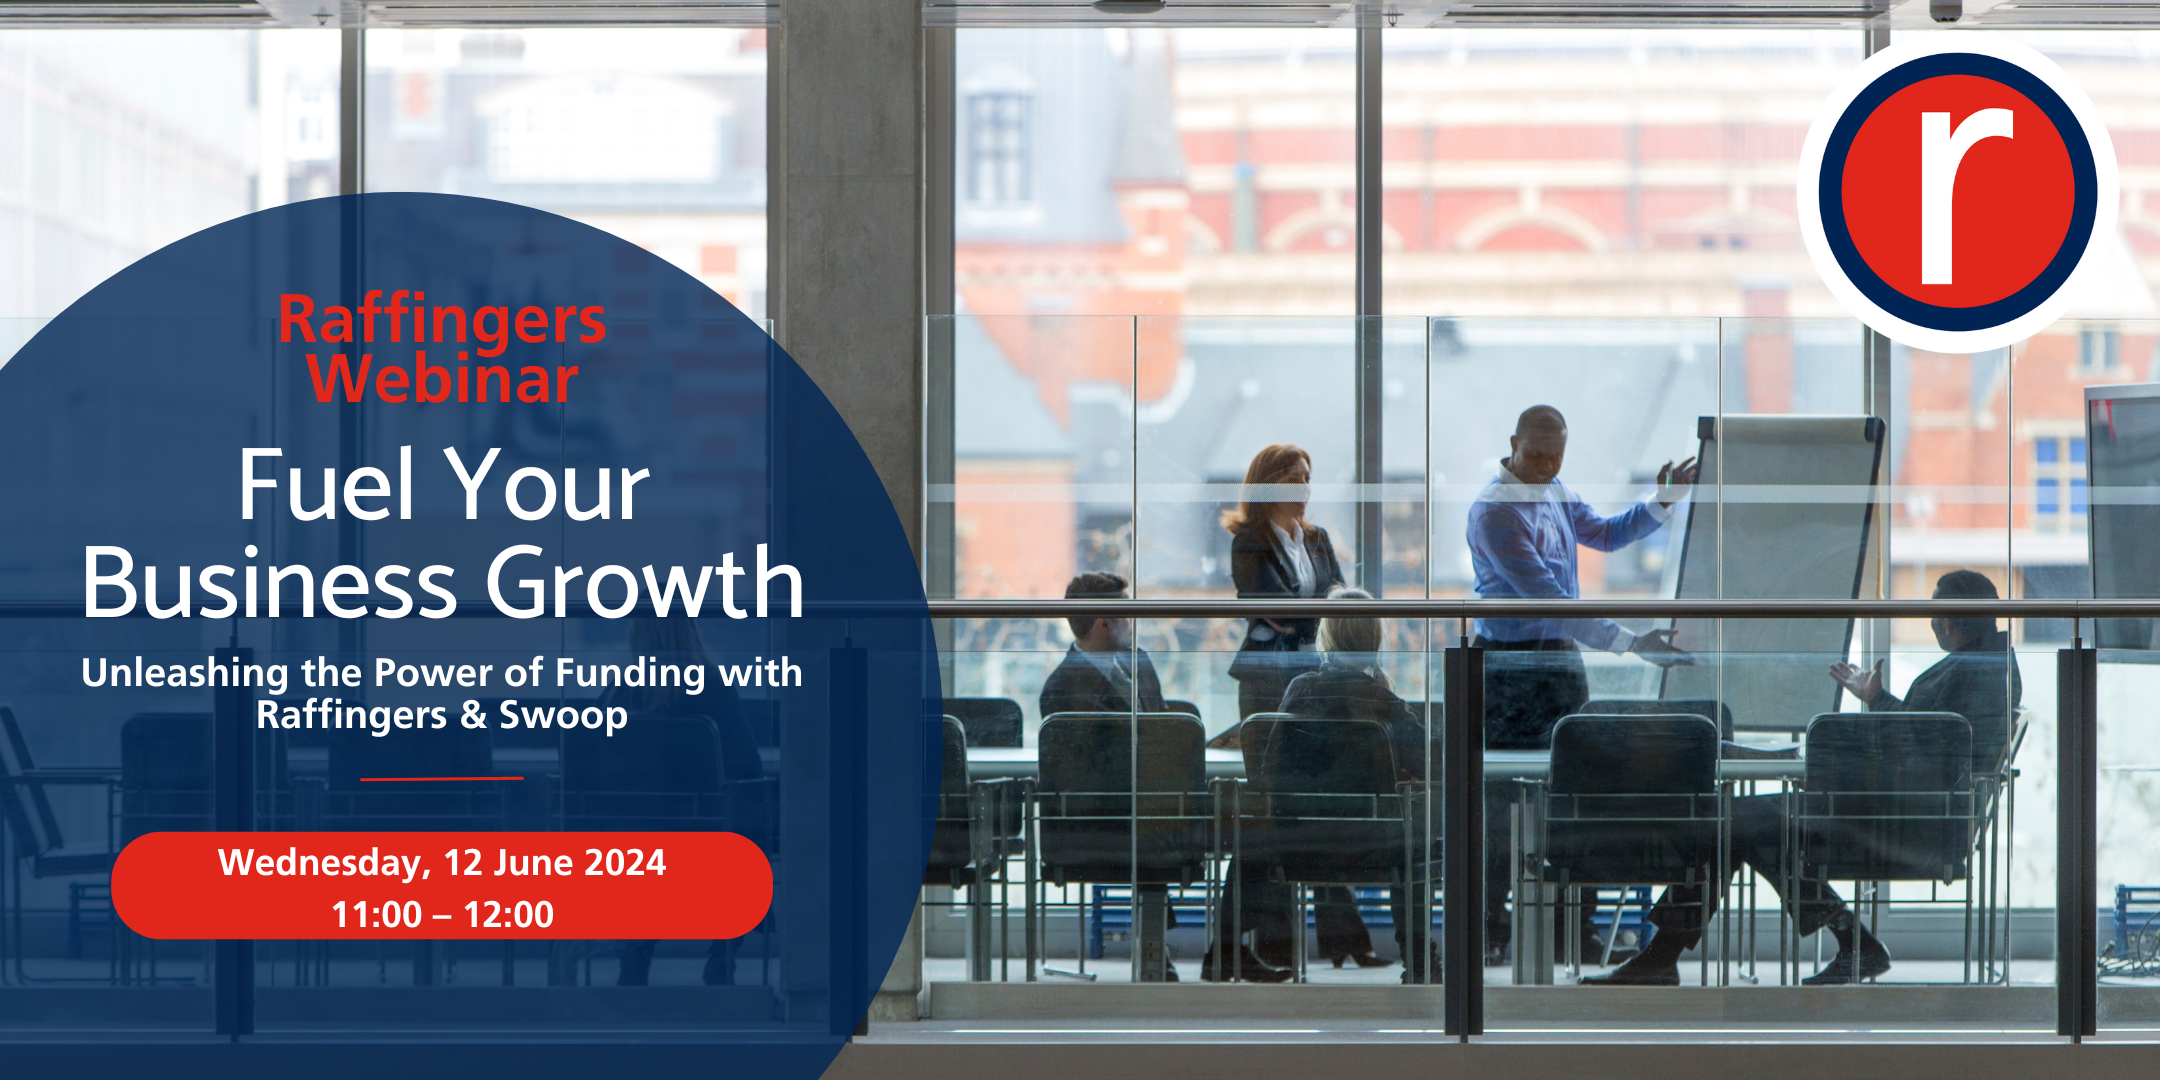 Webinar: Fuel Your Business Growth - Unleashing the Power of Funding with Raffingers & Swoop